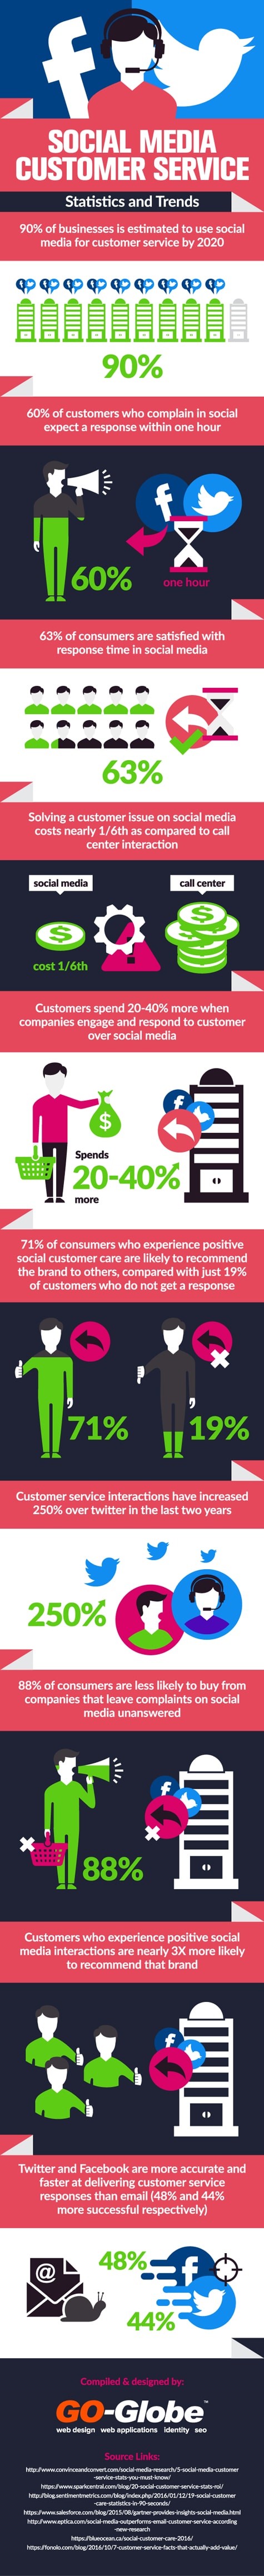 2091 475w infographic Why Its Time to Call Up Social Media For Customer Service